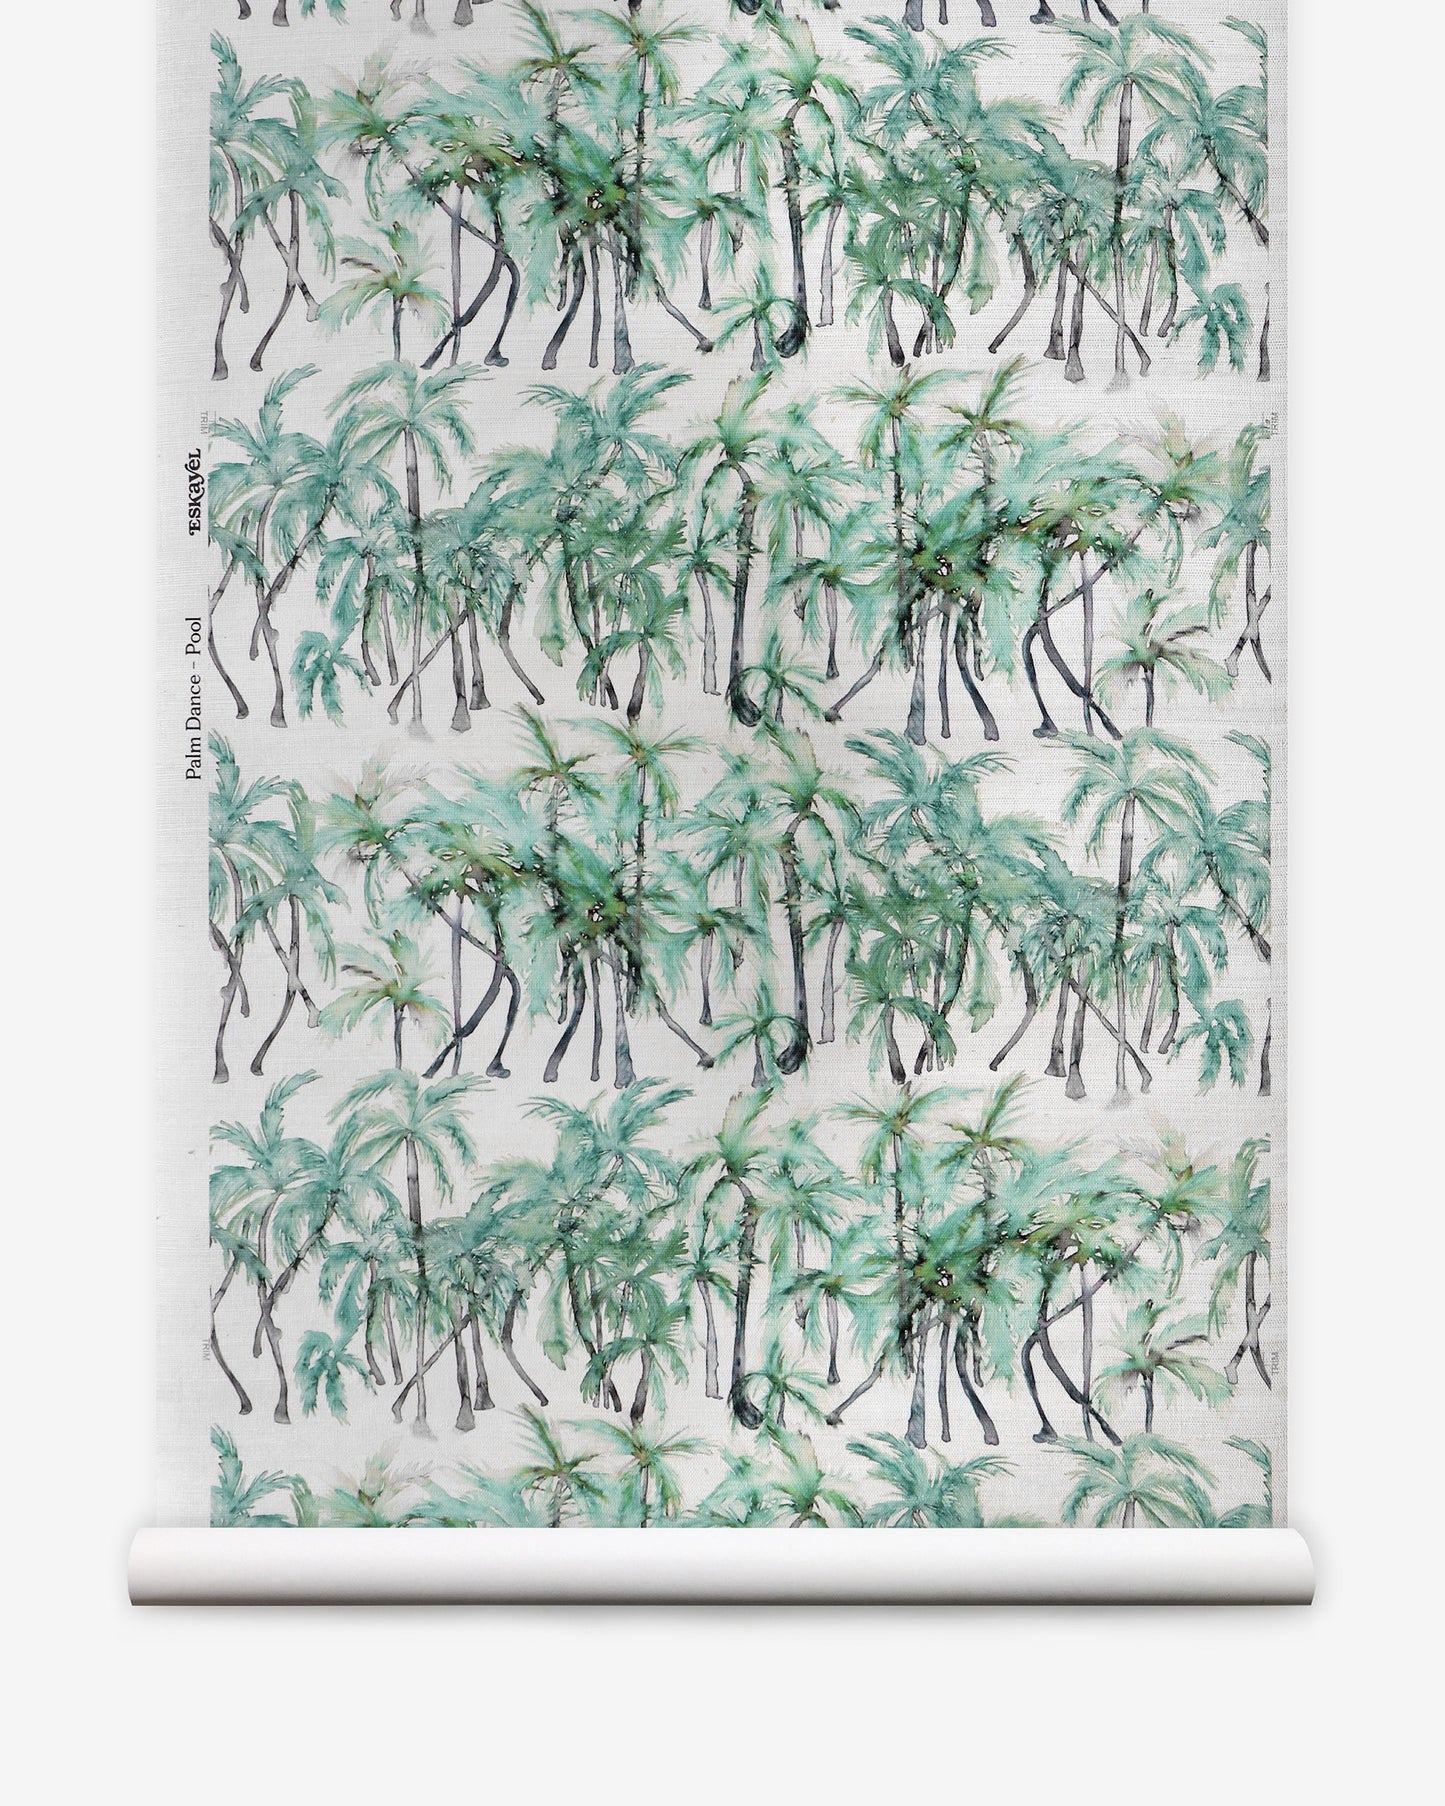 A roll of Palm Dance Grasscloth wallpaper with a Palm Dance pattern featuring palm trees on it